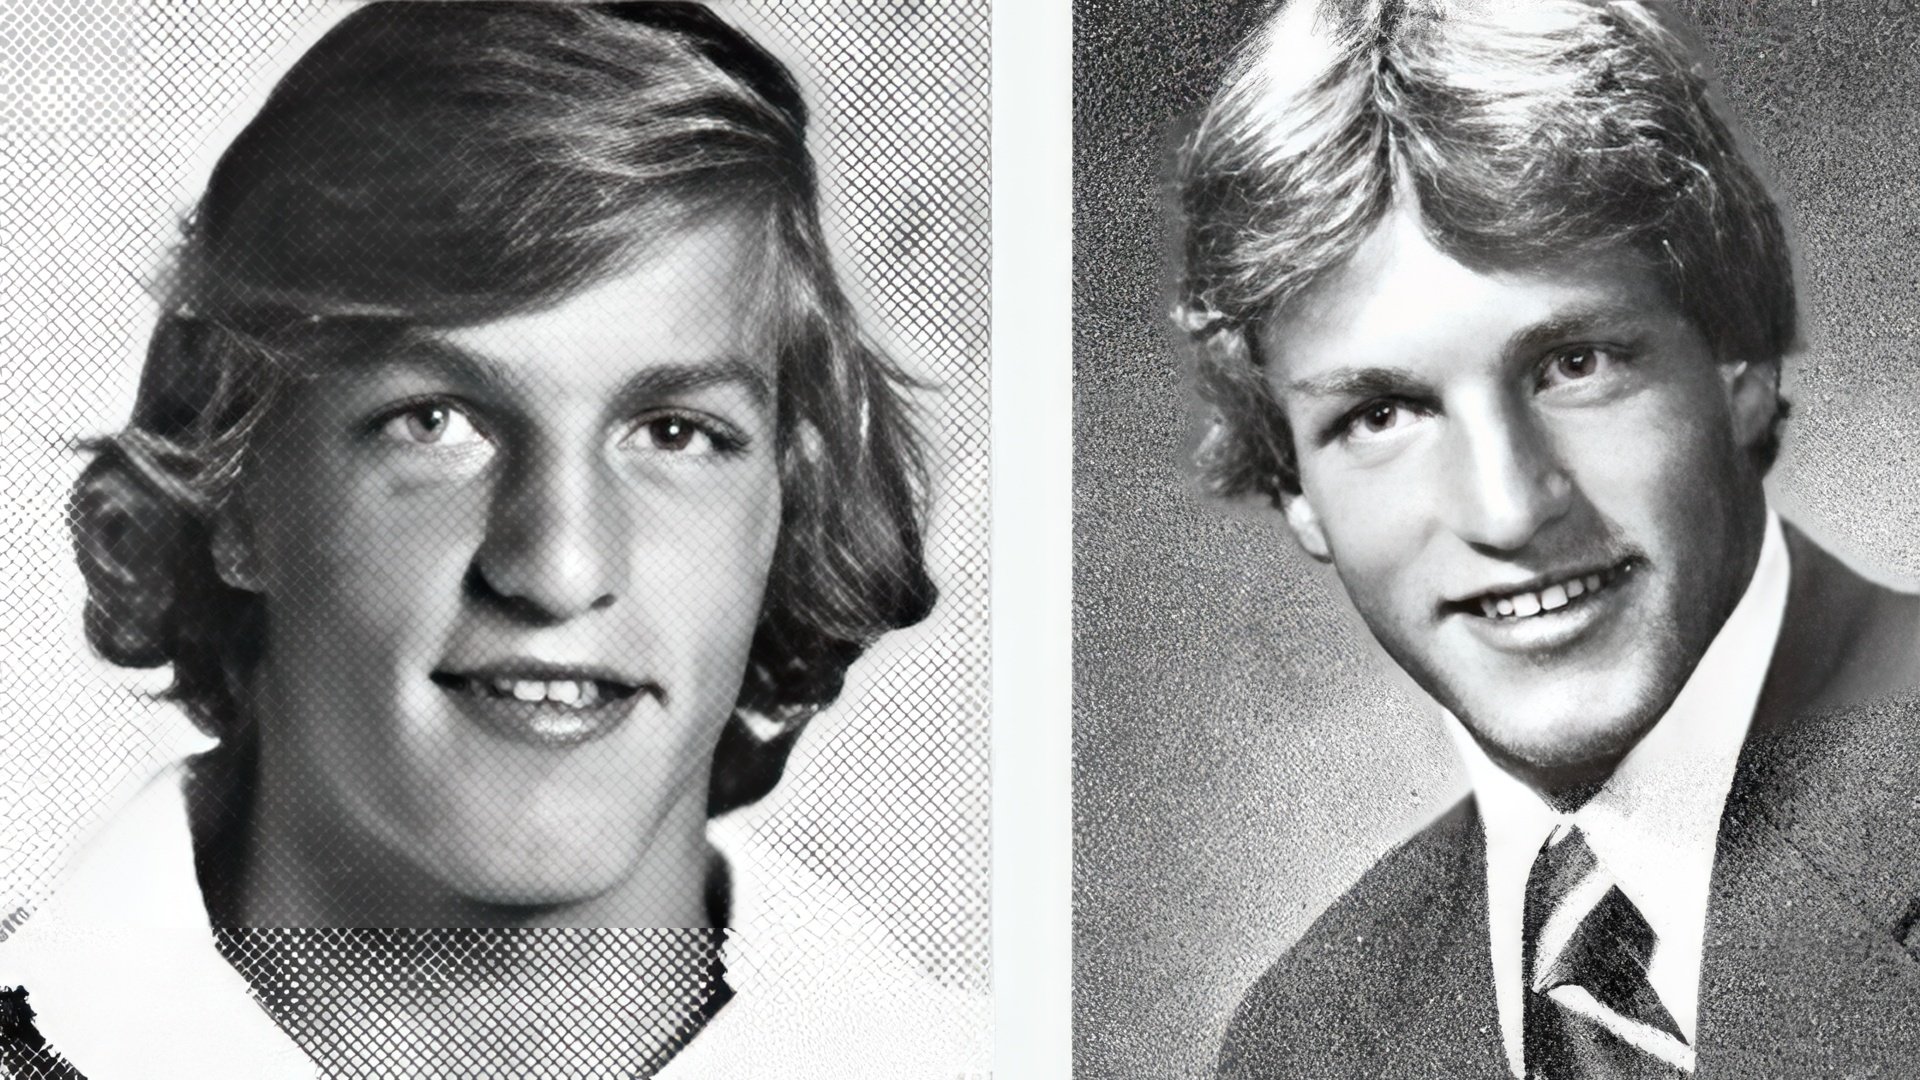 Woody Harrelson in his youth